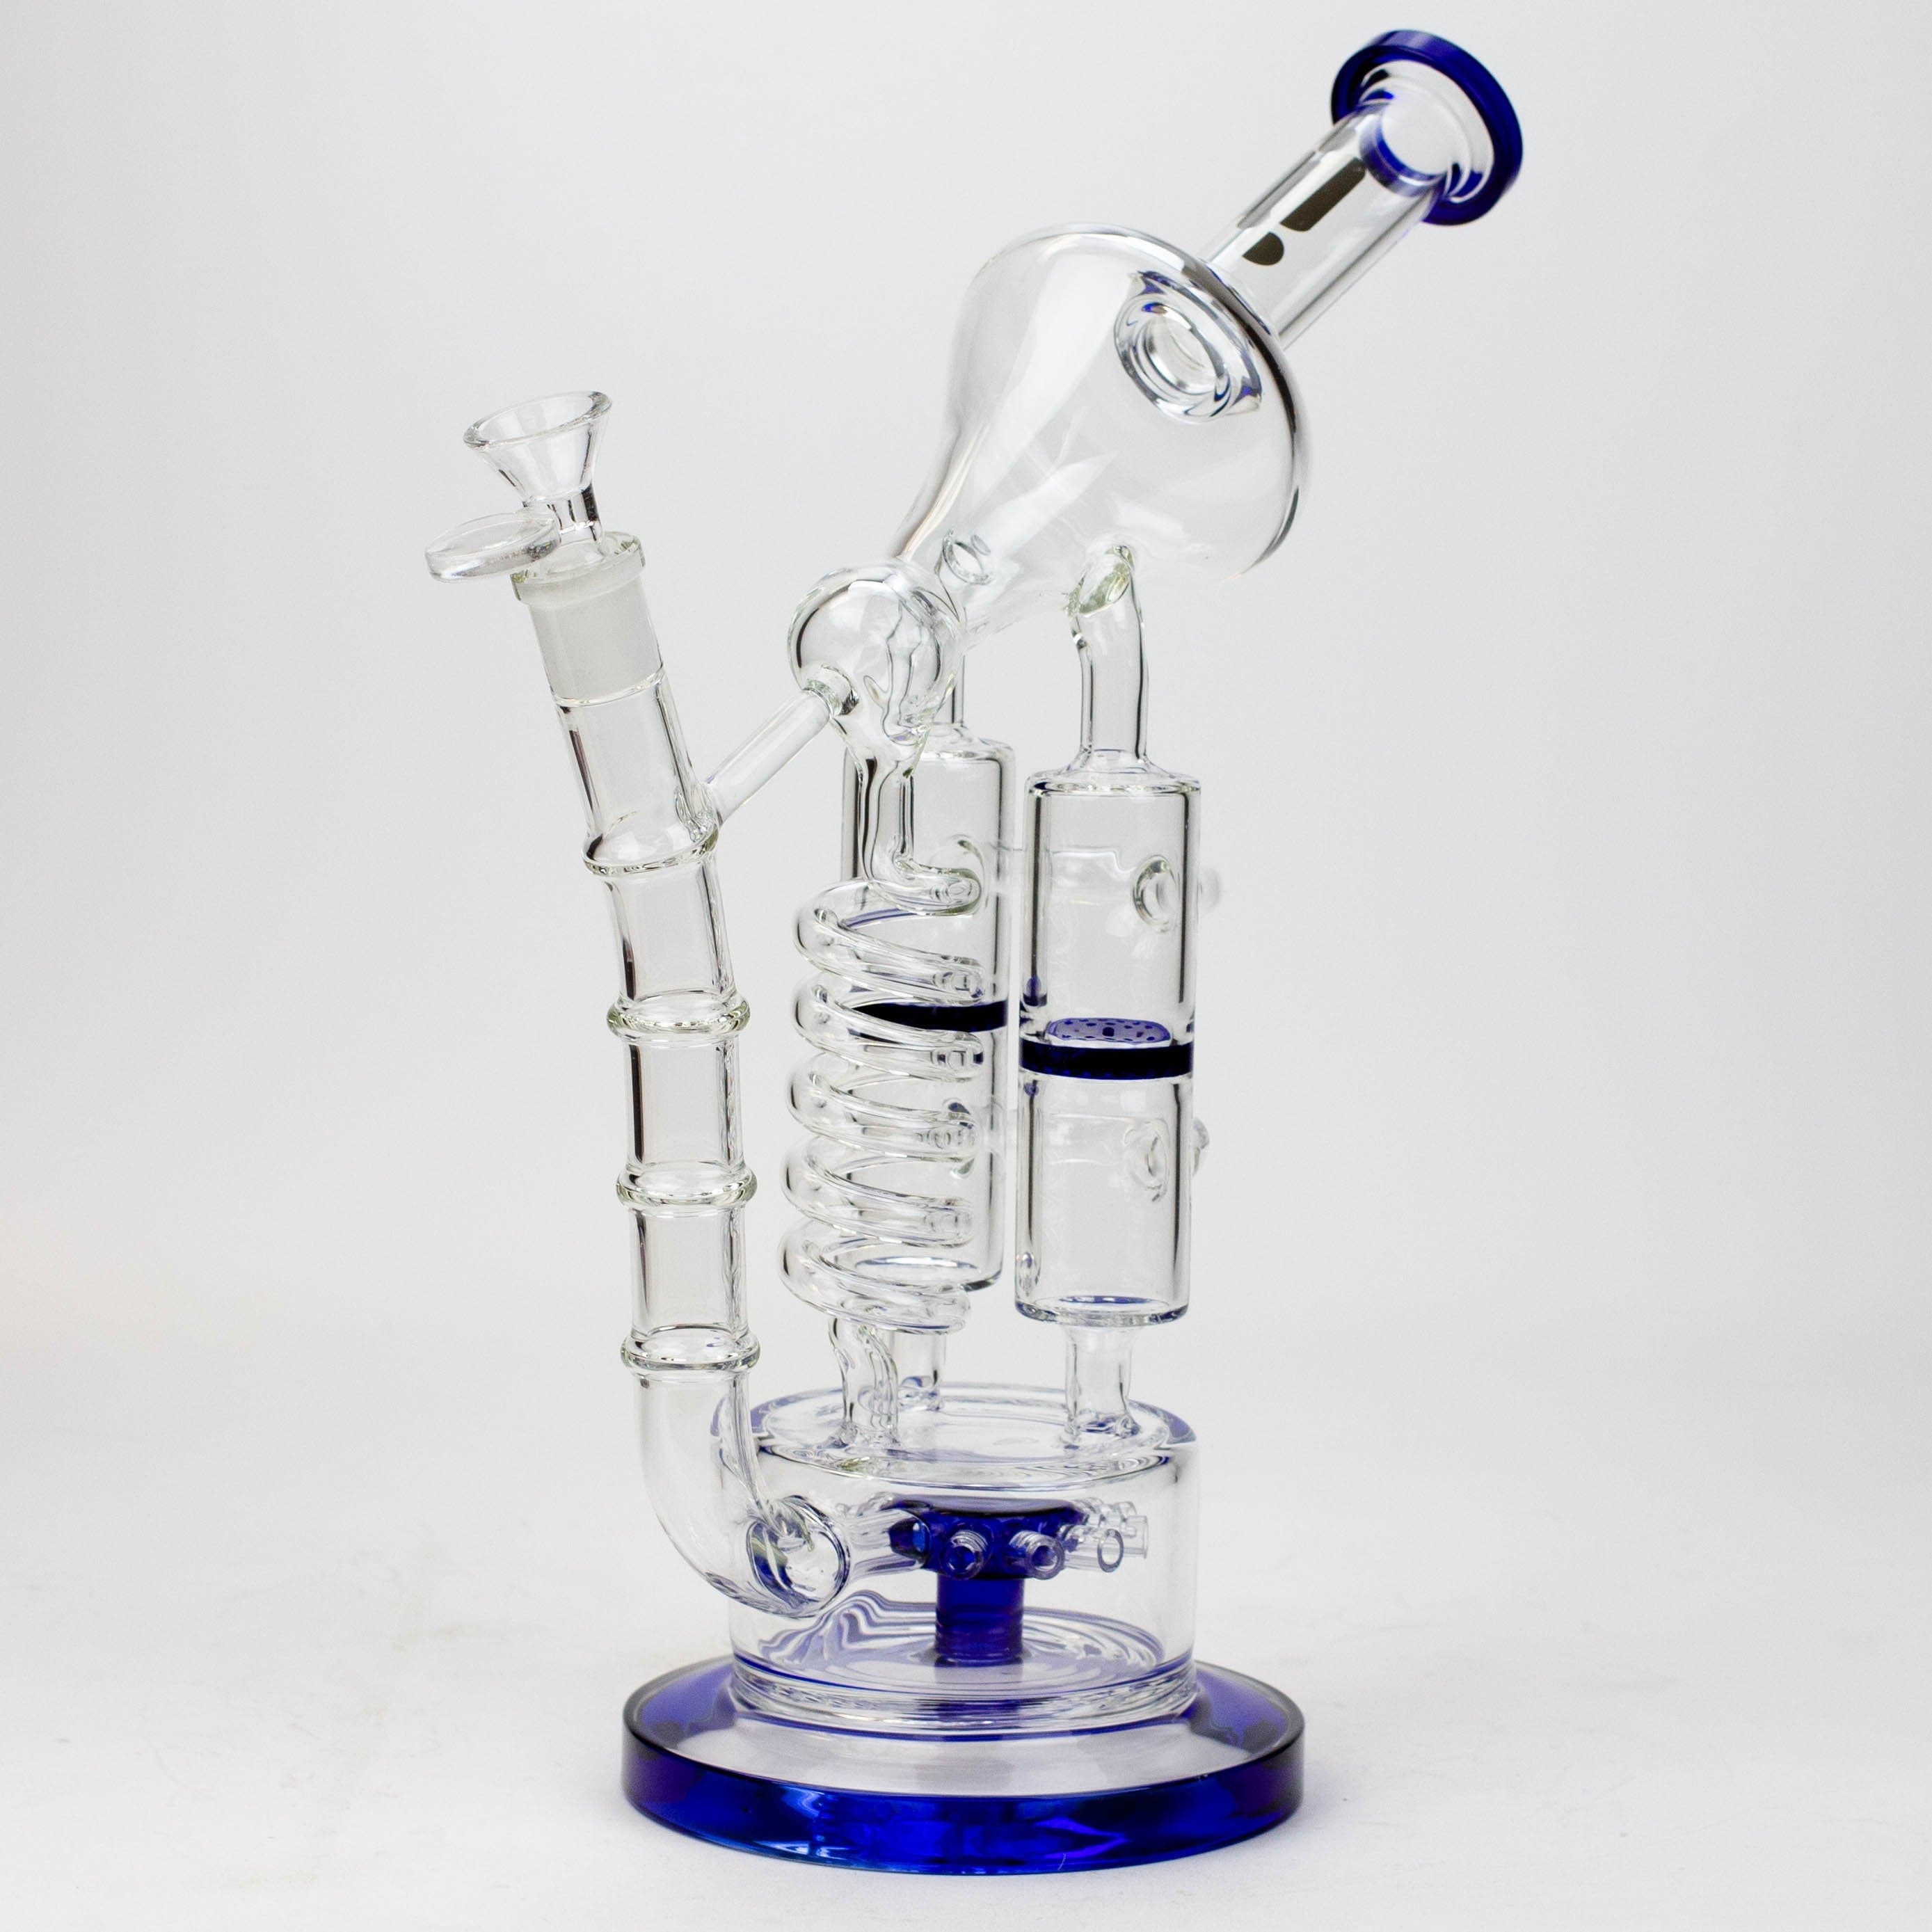 Infyniti coil, dual honeycome and flower diffuser glass recycler pipes 13"_5